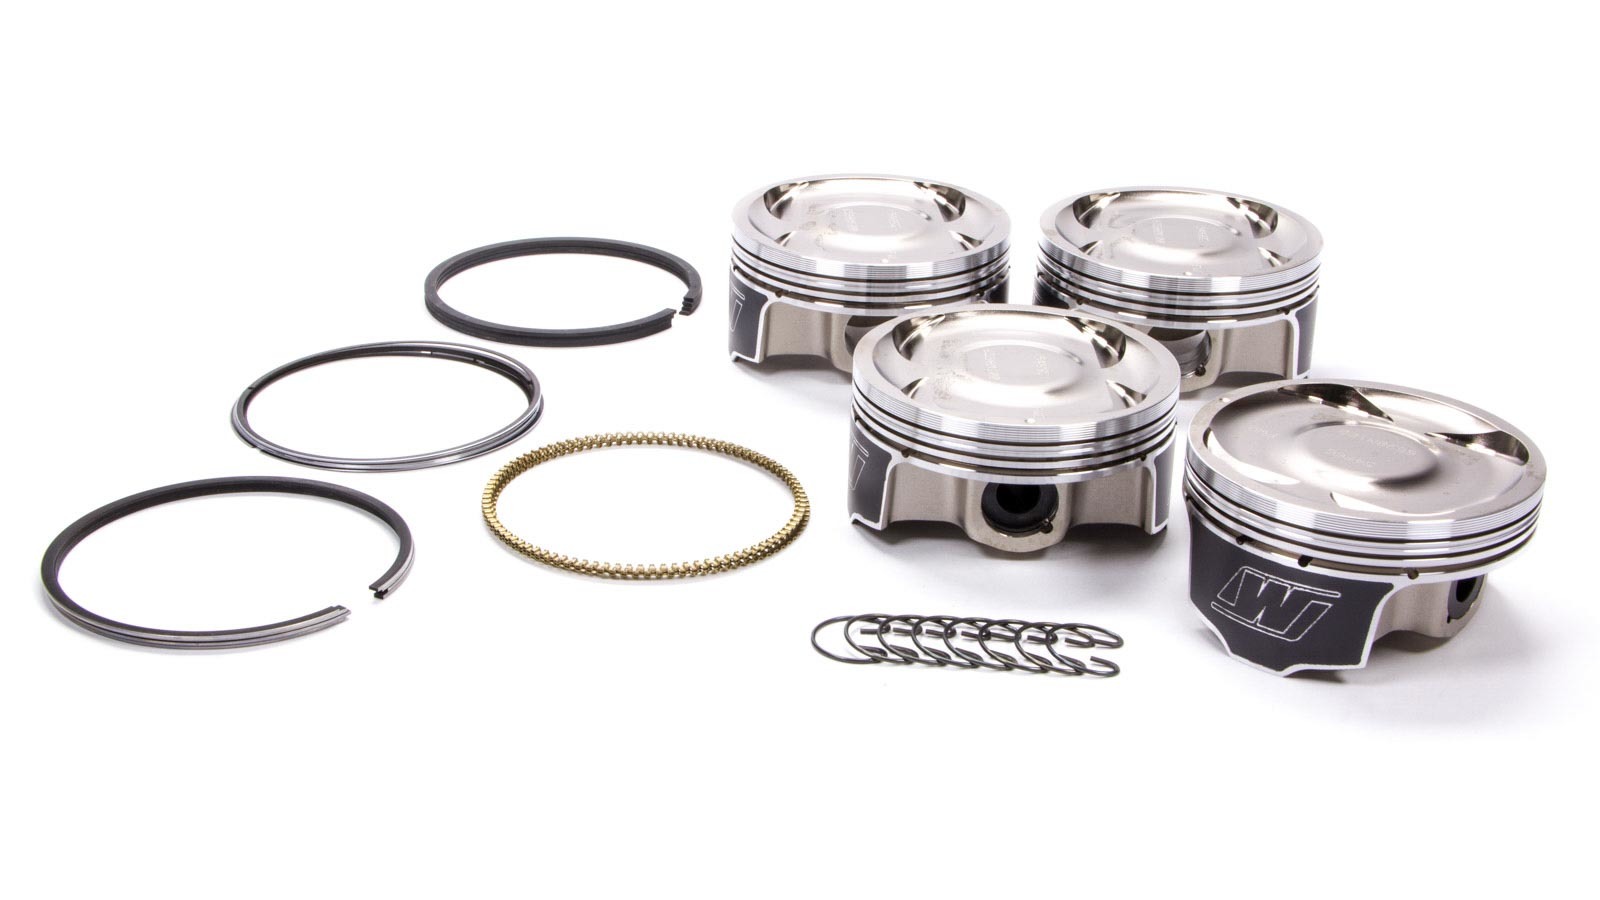 Wiseco Pistons K598M100AP Piston and Ring, Sports Compact, Forged, 100.00 mm Bore, 1.2 x 1.5 x 2.0 mm Ring Groove, Minus 19.00 cc, Armor Plated, Subaru EJ, Kit